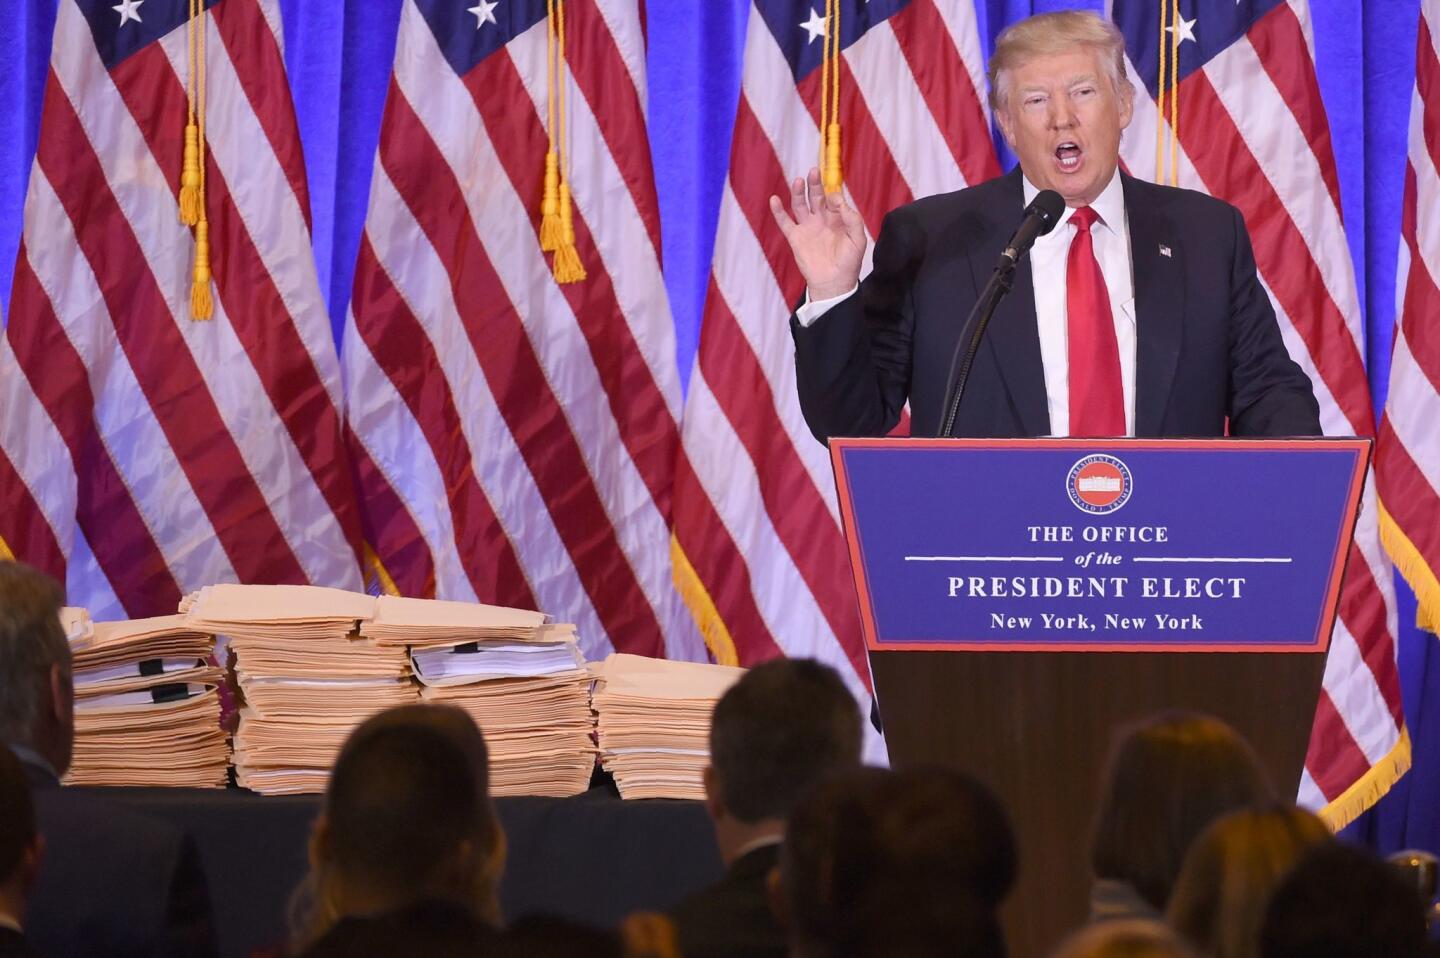 Numerous files are displayed as President-elect Donald Trump gives a press conference Jan. 11, 2017, in New York.